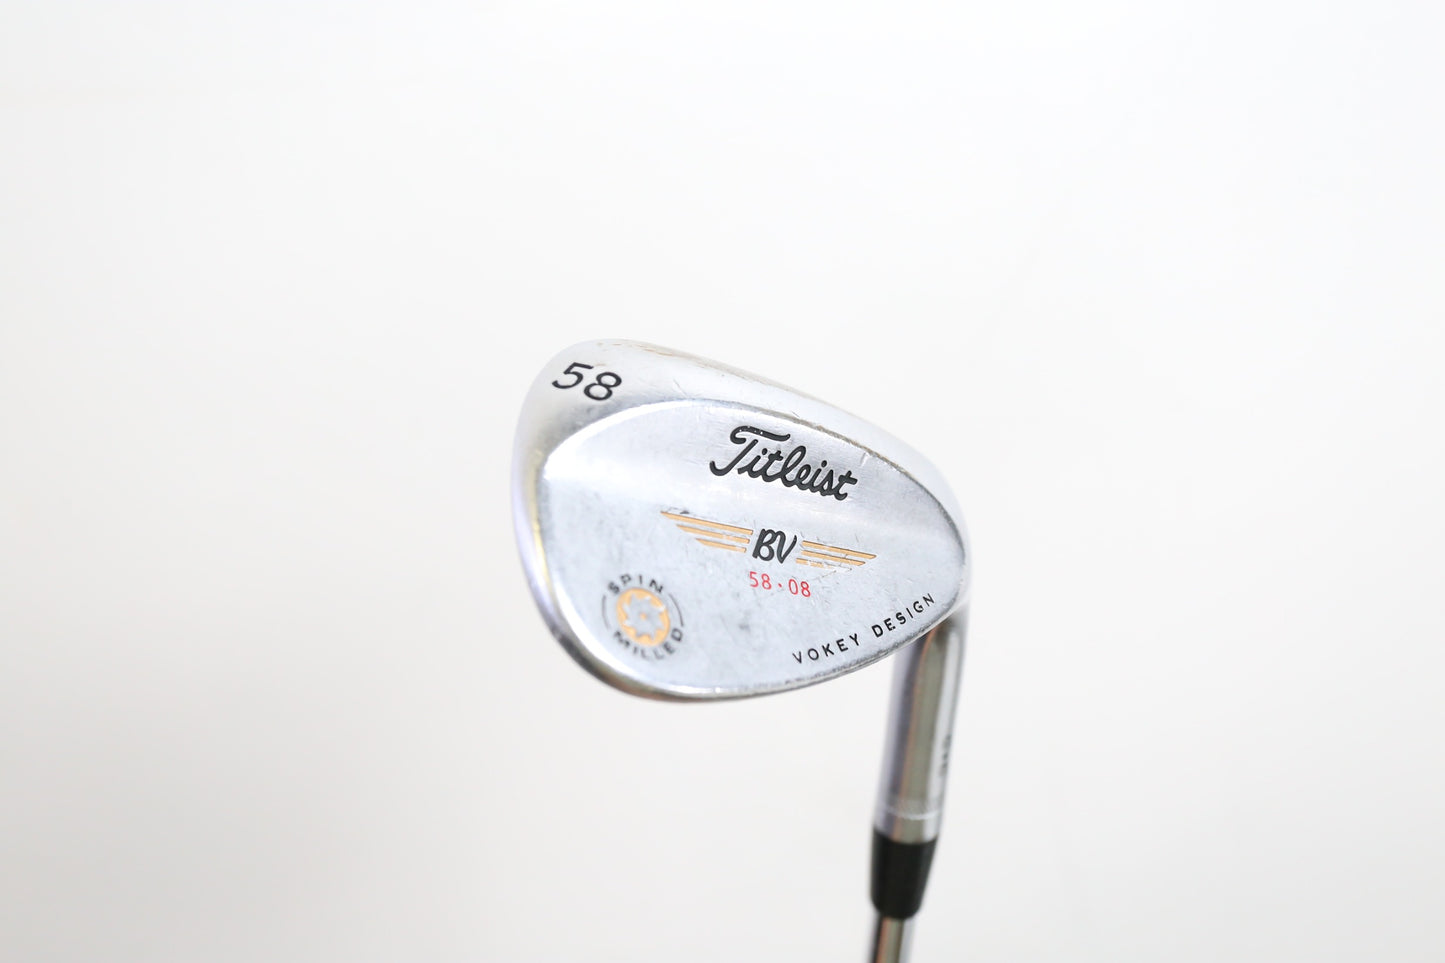 Used Titleist Vokey Spin Milled Tour Chrome '09 Lob Wedge - Right-Handed - 58 Degrees - Stiff Flex